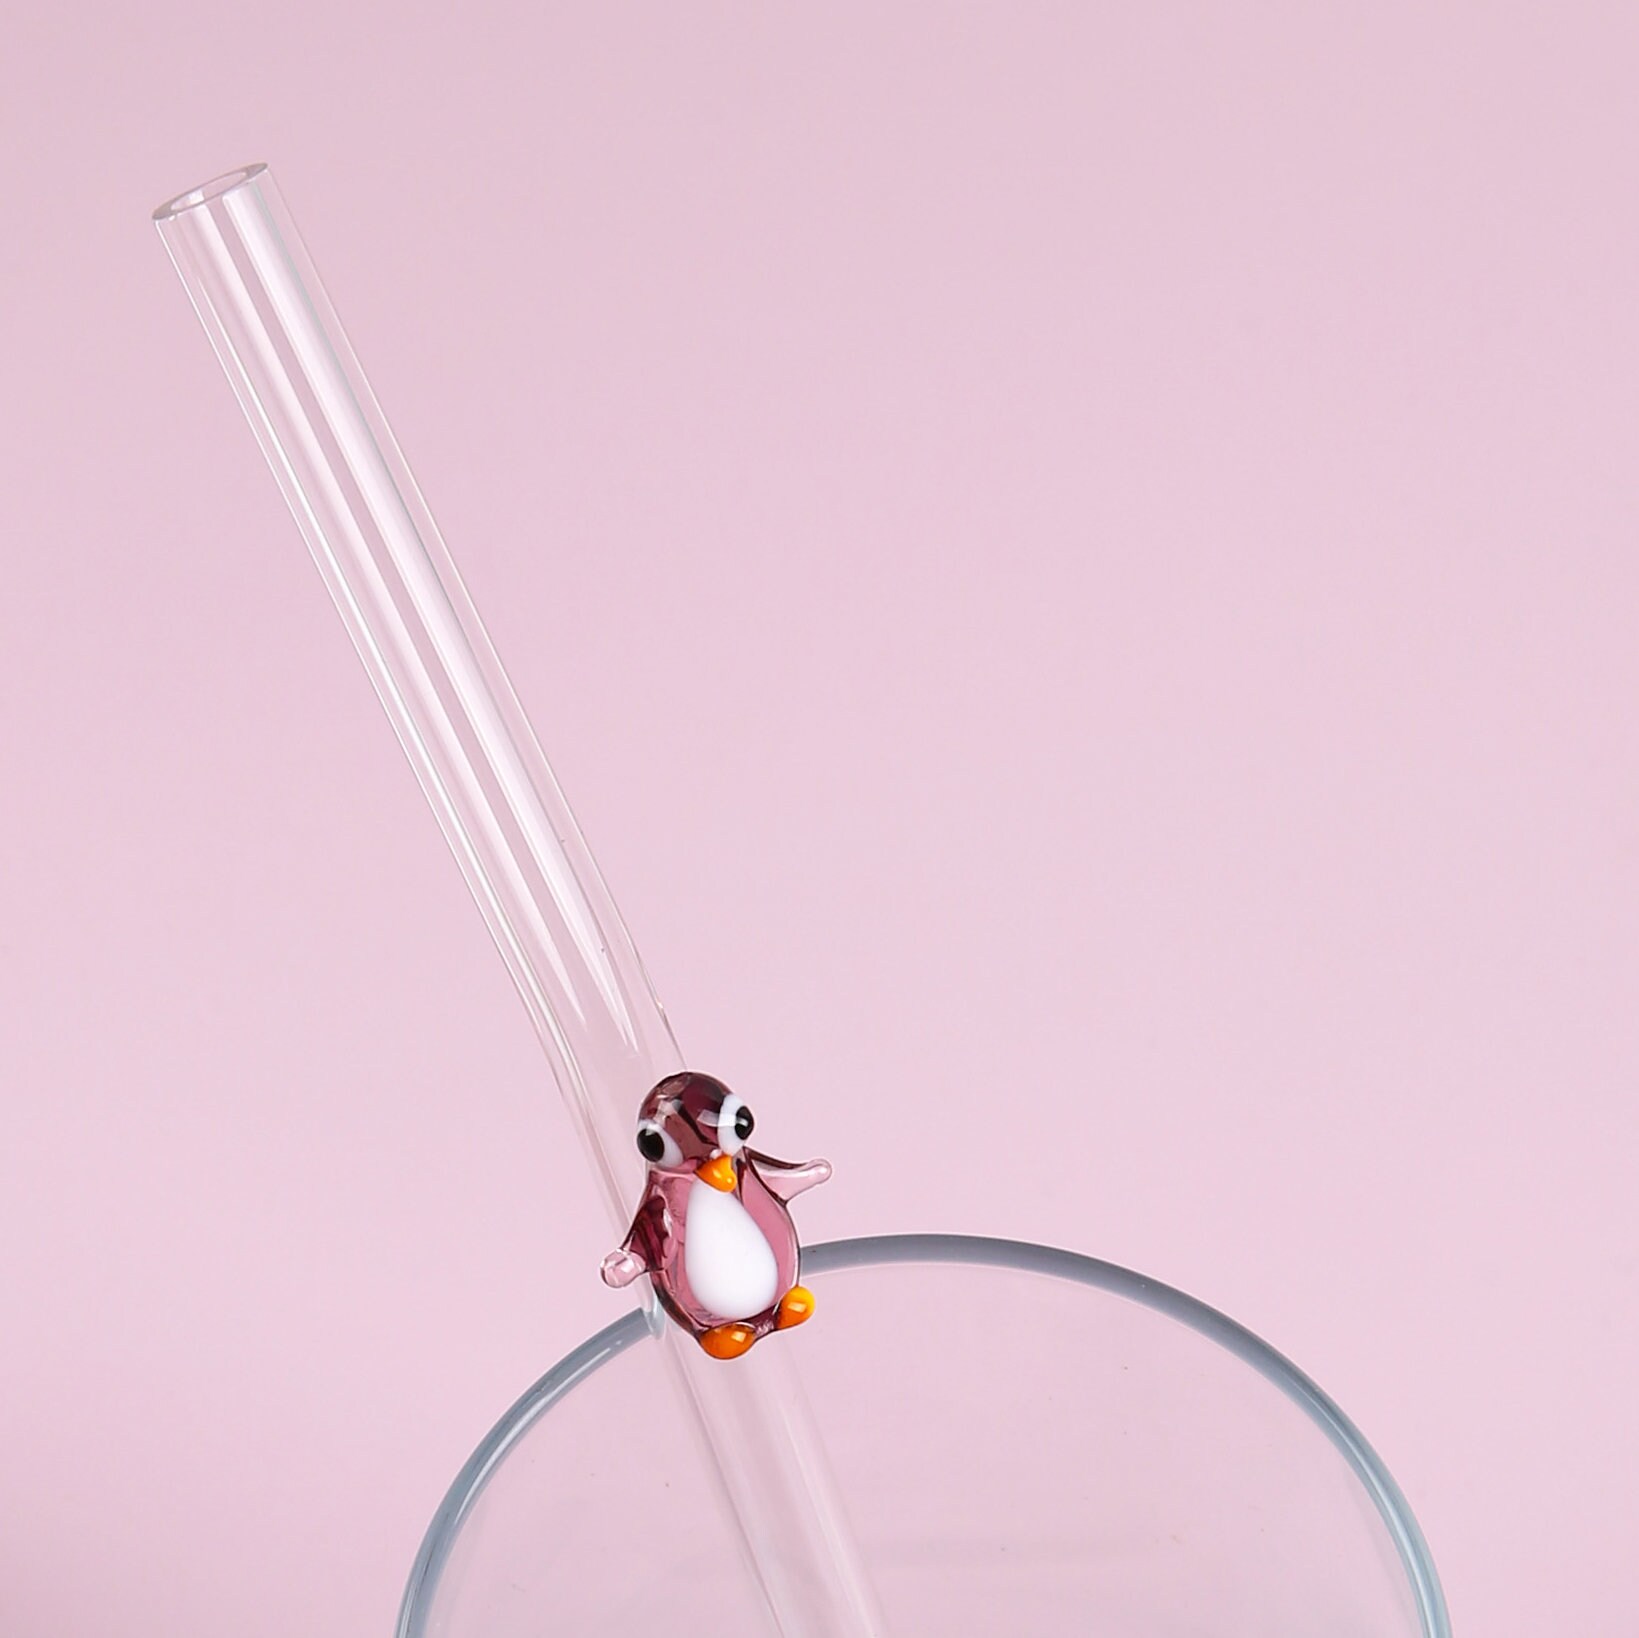 Handmade Glass Straw With Cute Penguin Drinking Straw -  Finland